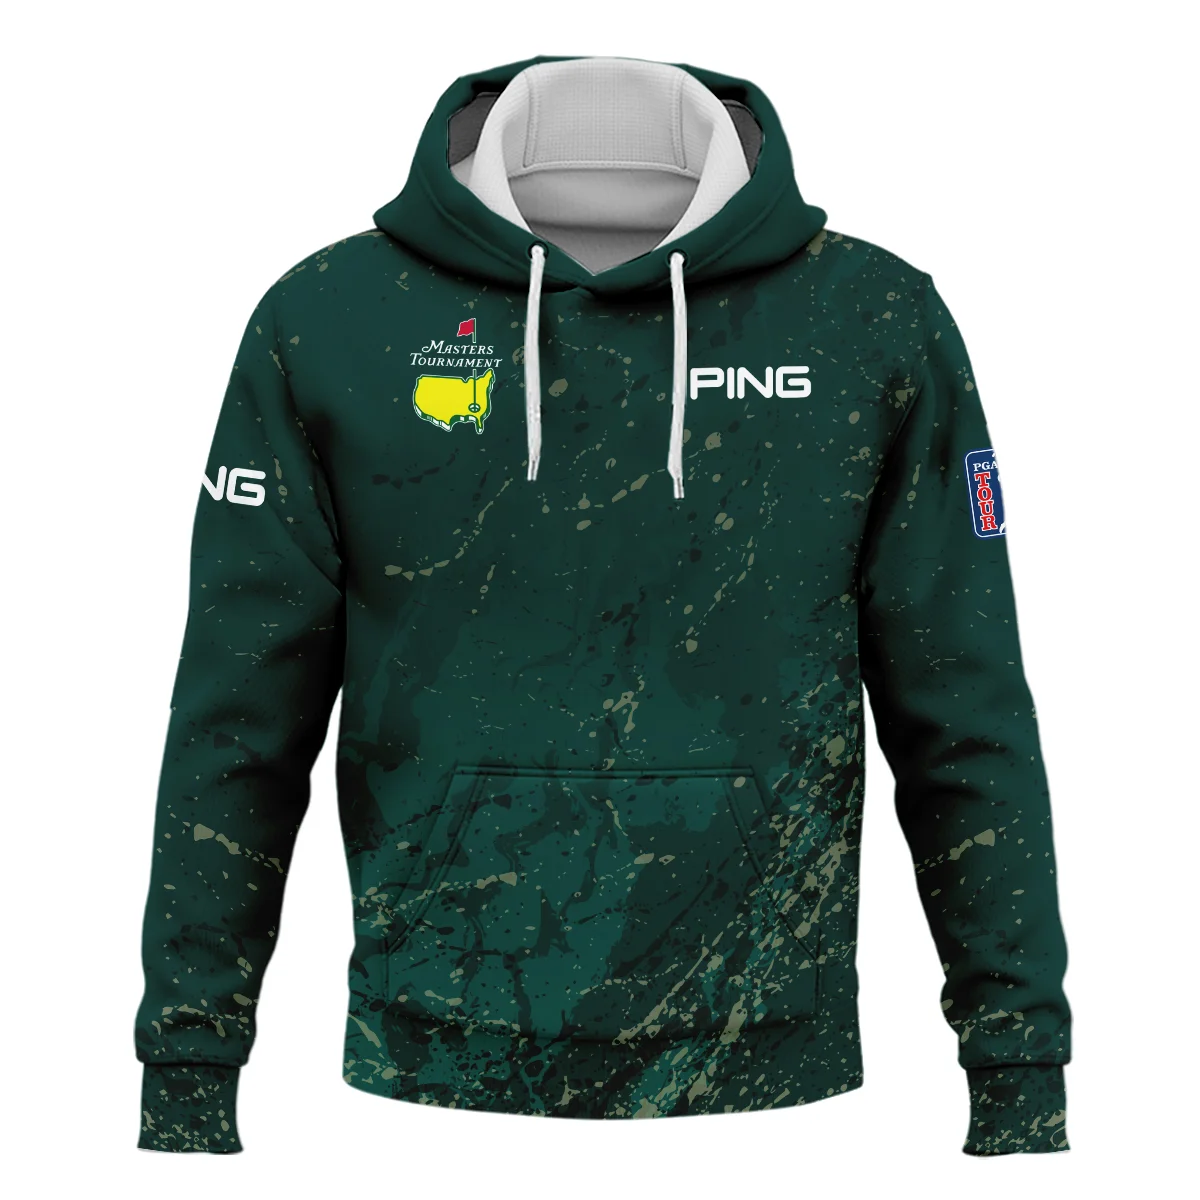 Old Cracked Texture With Gold Splash Paint Masters Tournament Ping Hoodie Shirt Style Classic Hoodie Shirt